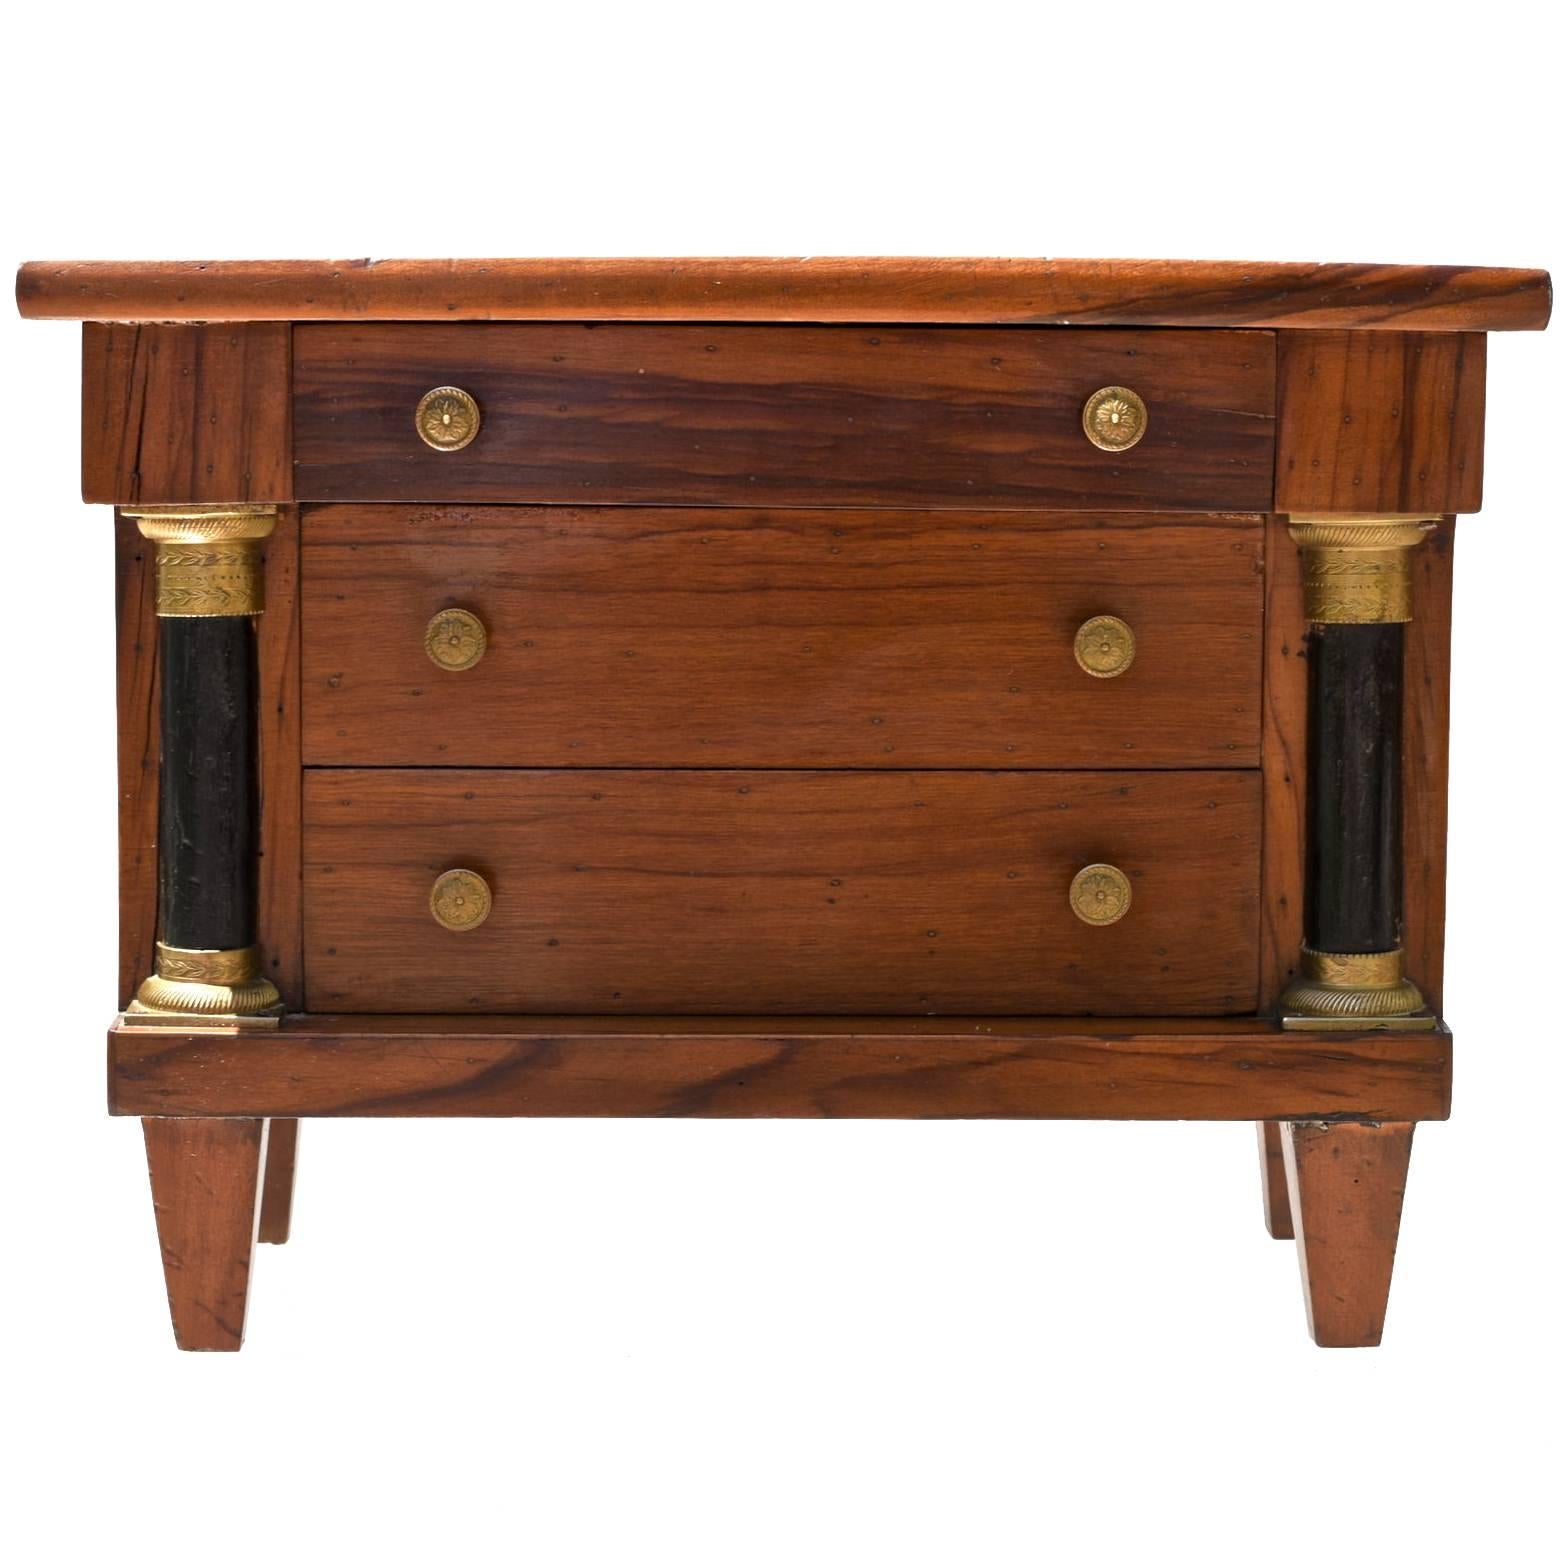 Miniature Neoclassical Tabletop Commode